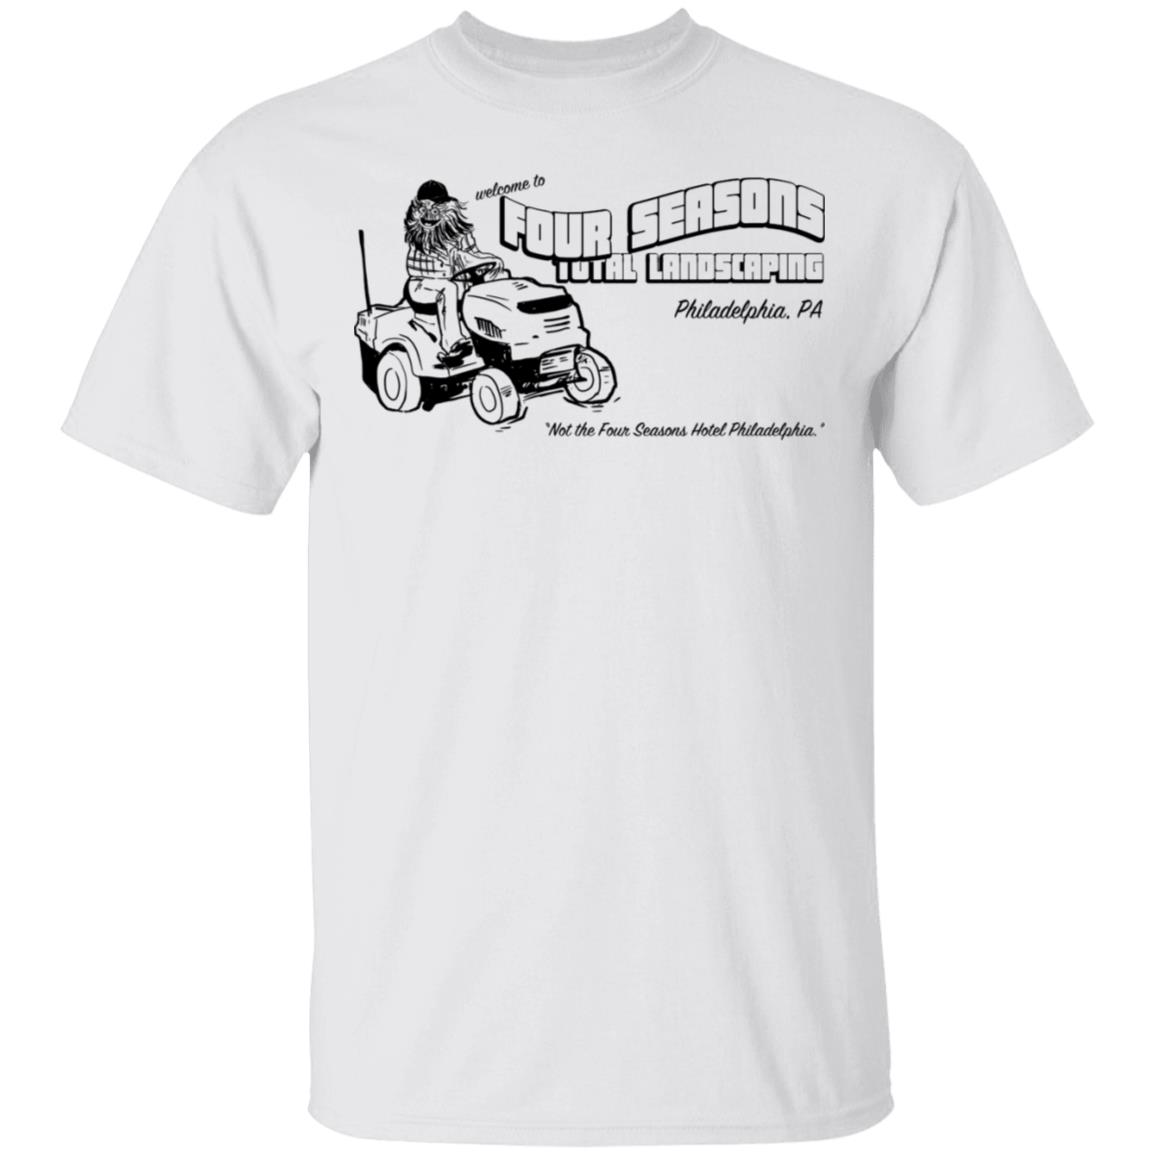 Welcome To Four Seasons Total Landscaping Philadelphia Shirt